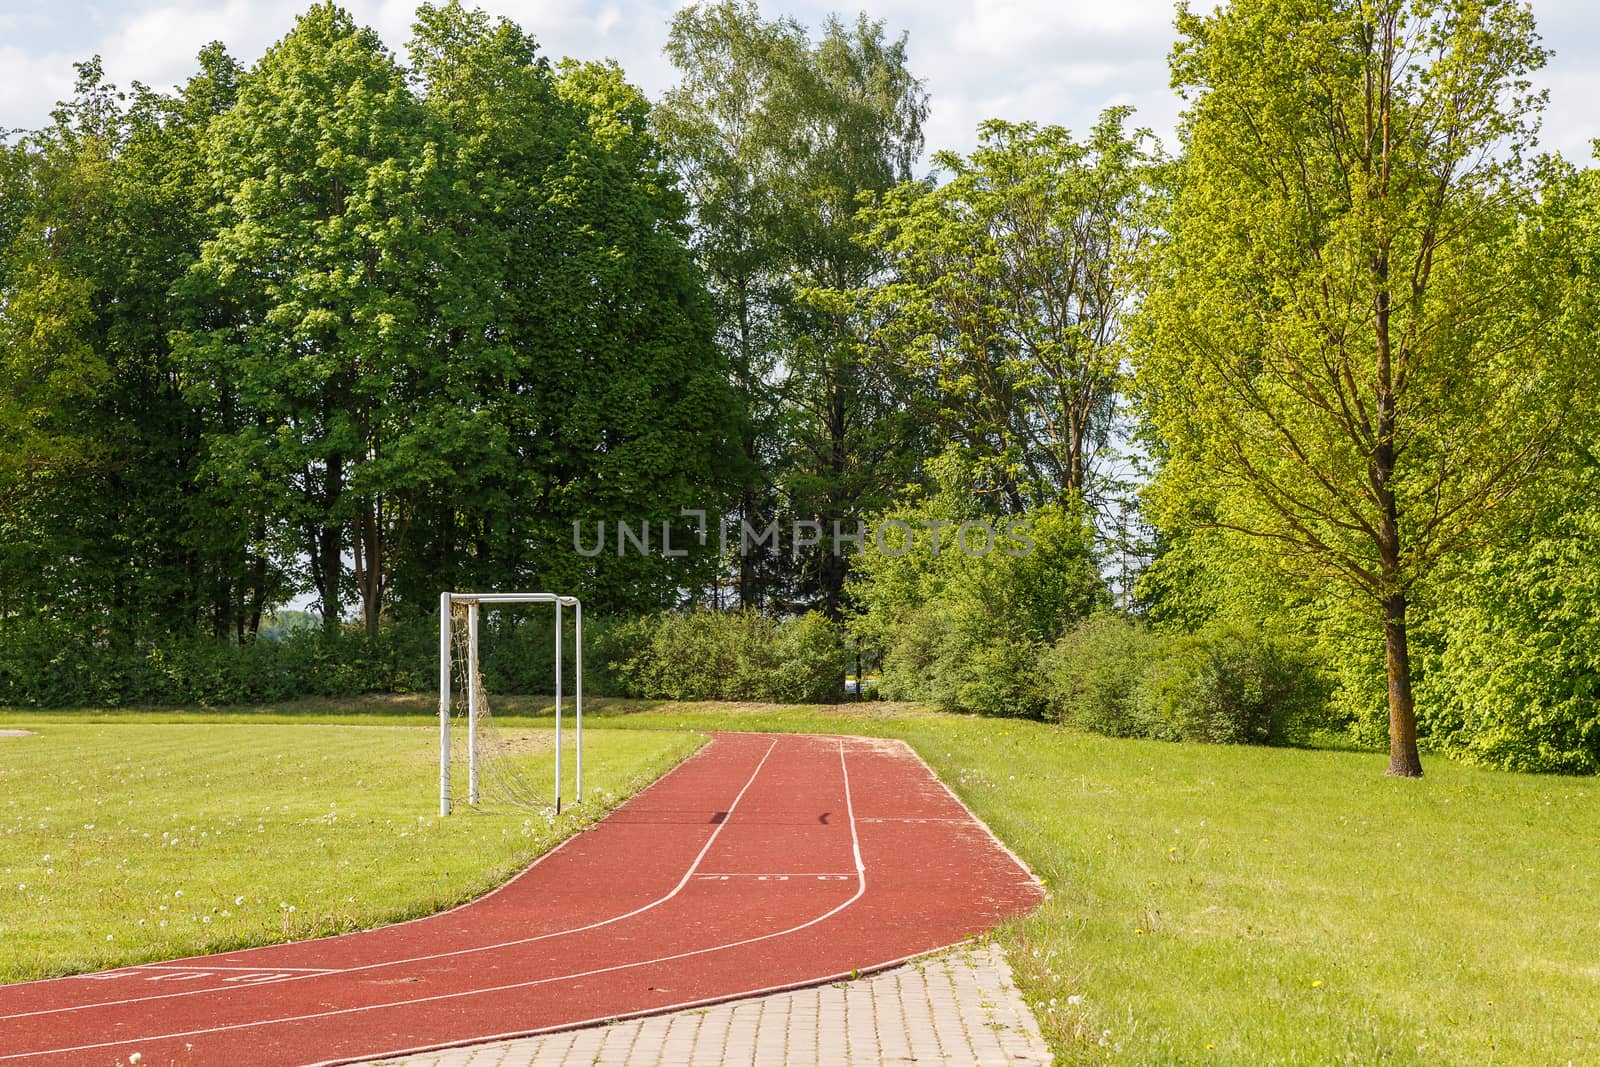 fragment of  running track in the village,Code,Latvia